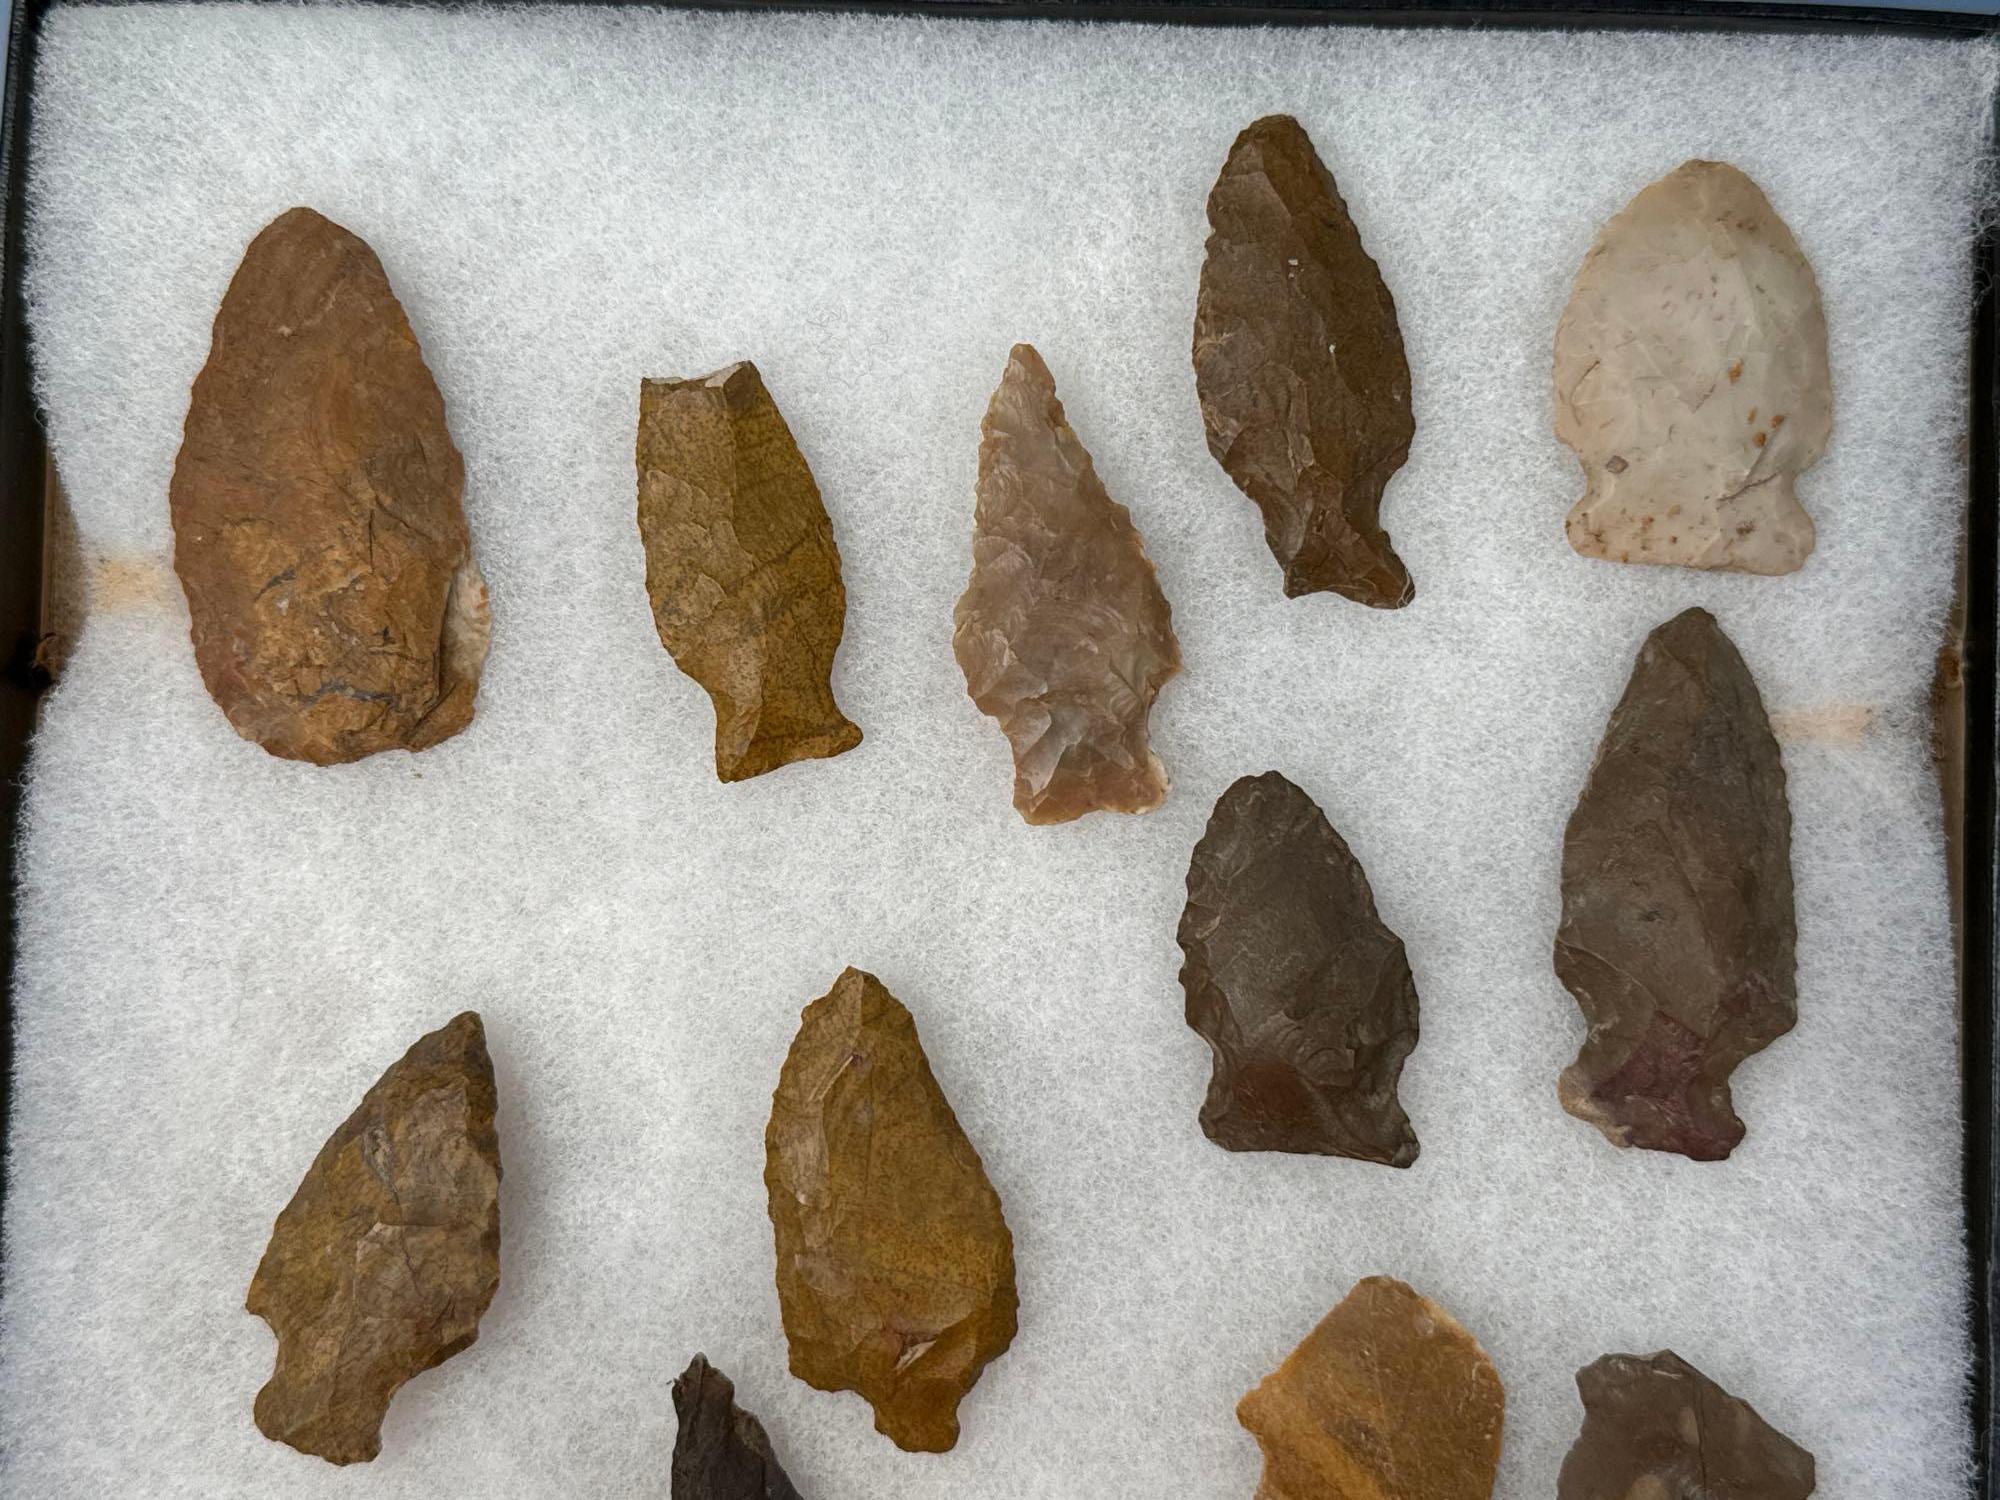 20 Various Jasper Artifacts, Points, Tools, Flake Knives, Longest is 2 1/8", Found in the Oley Valle